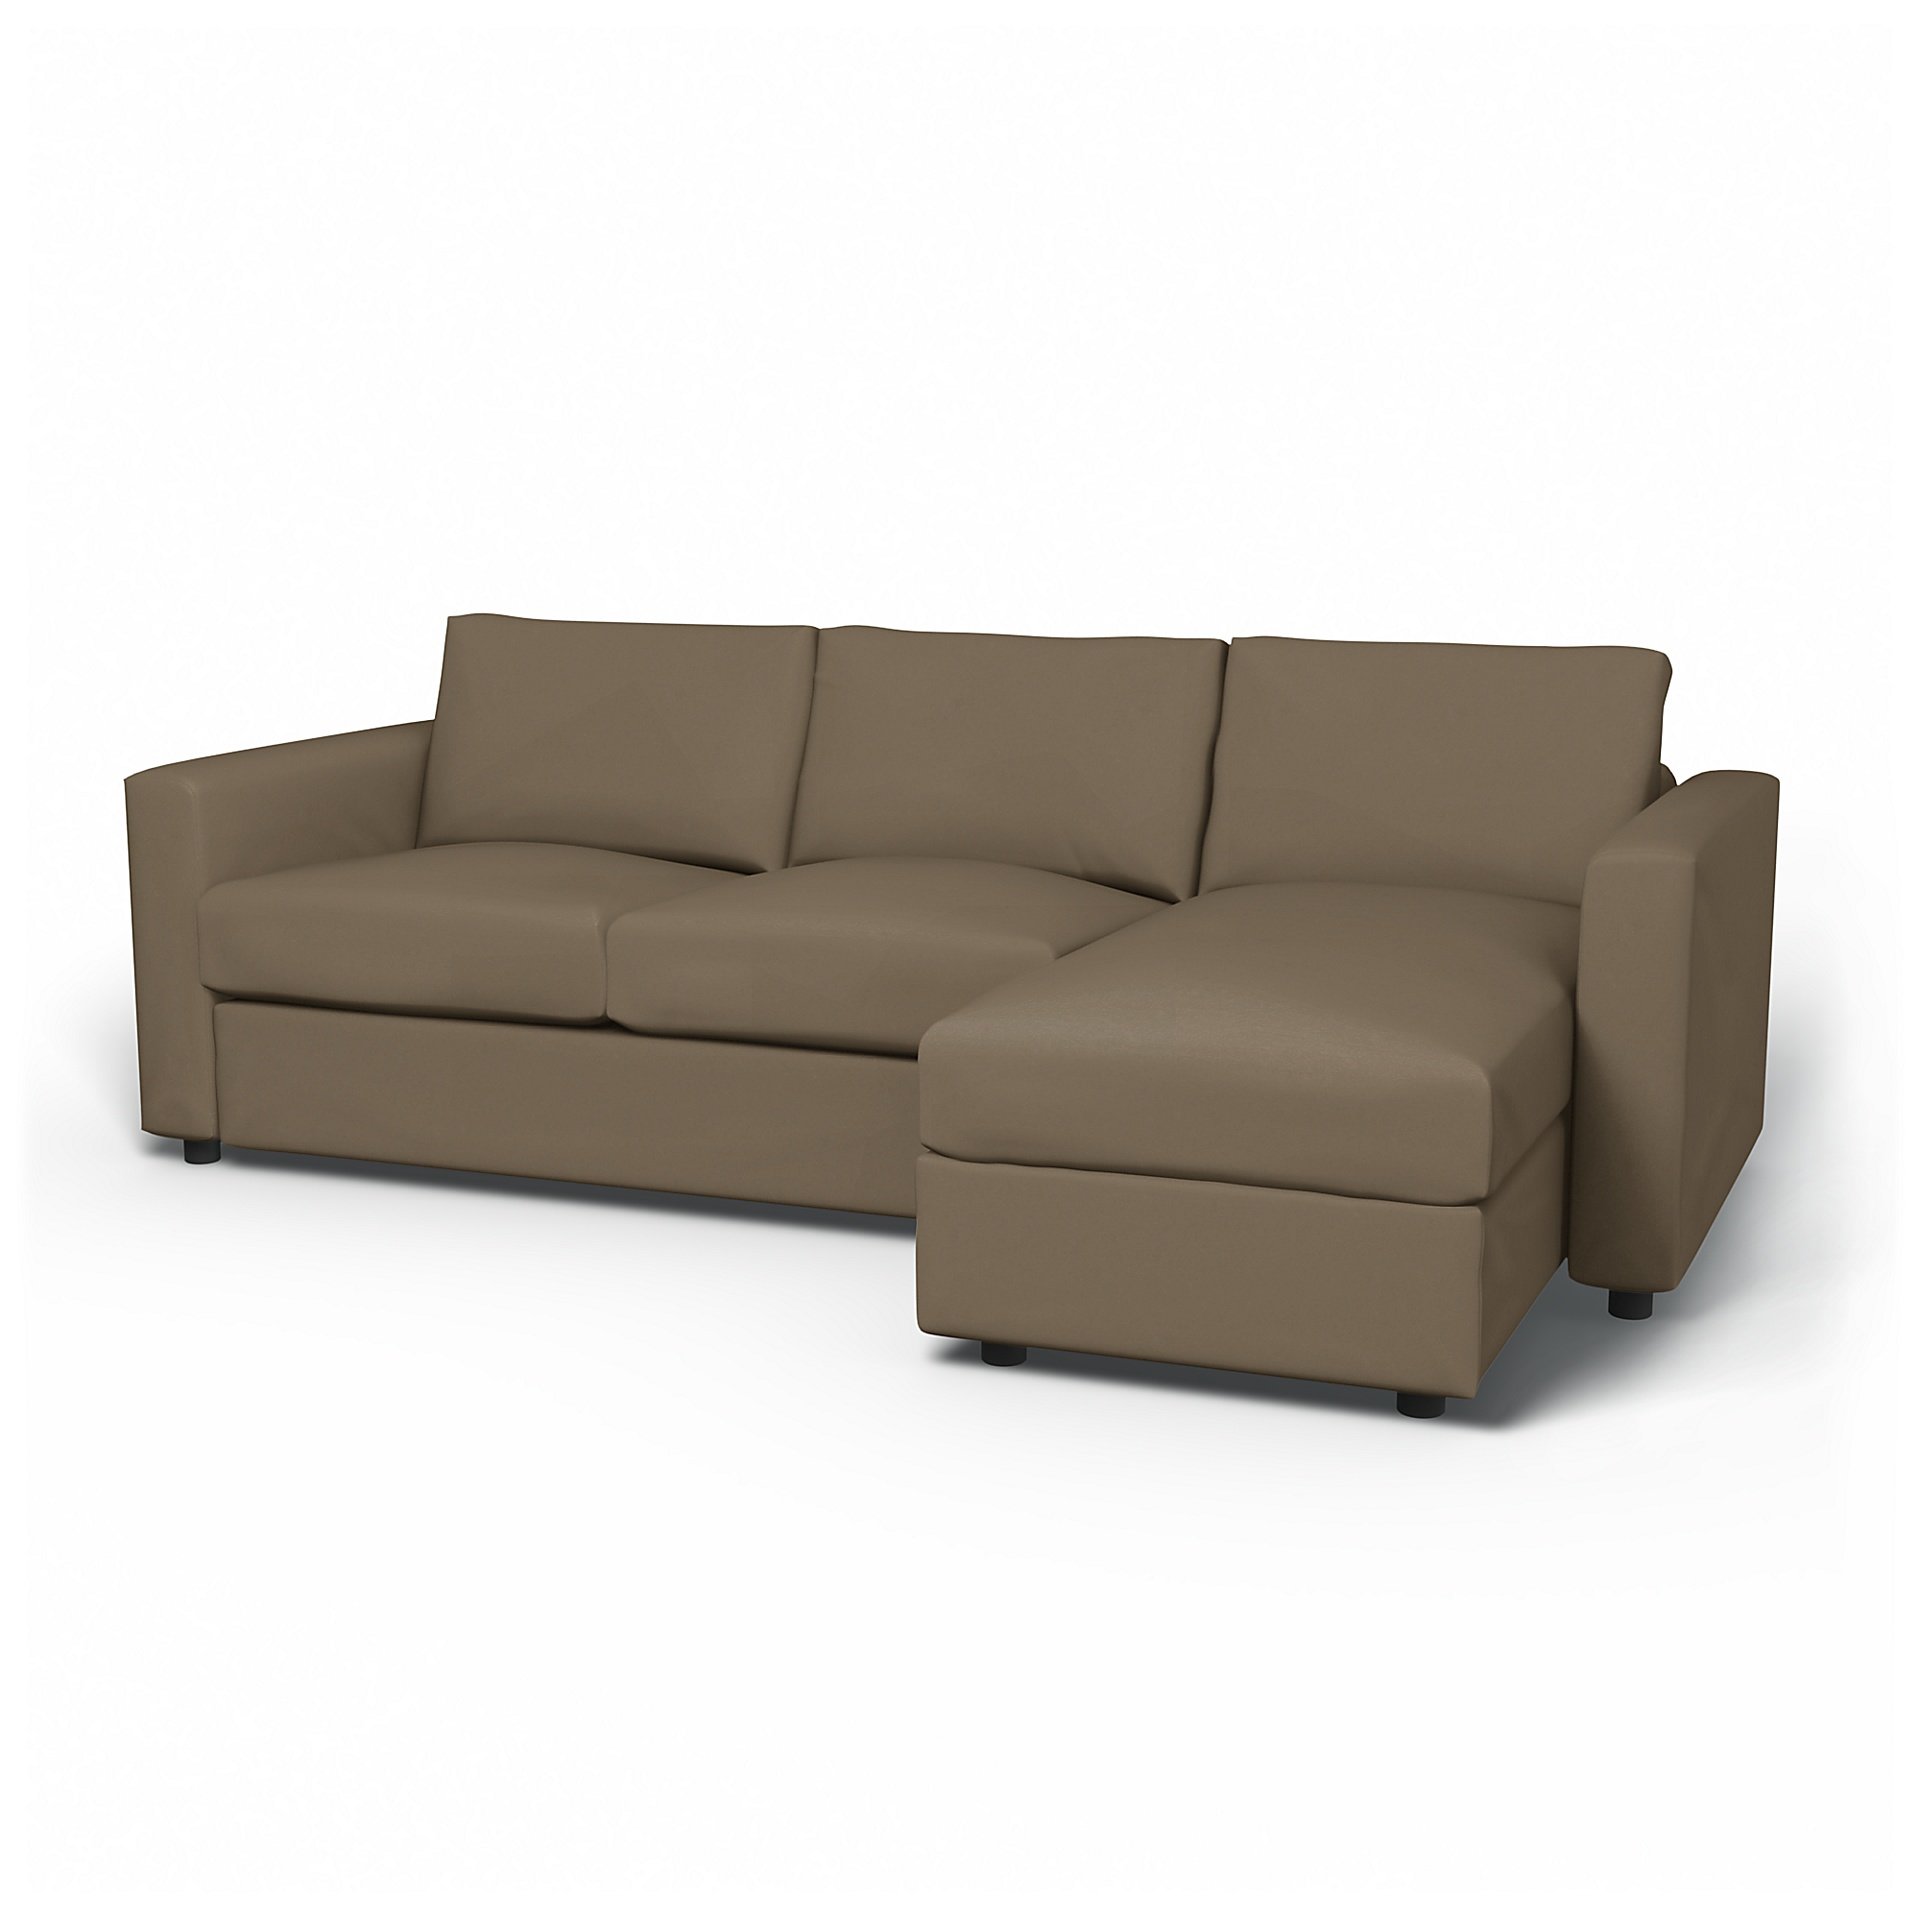 IKEA - Vimle 2 Seater Sofa with Chaise Cover, Taupe, Velvet - Bemz